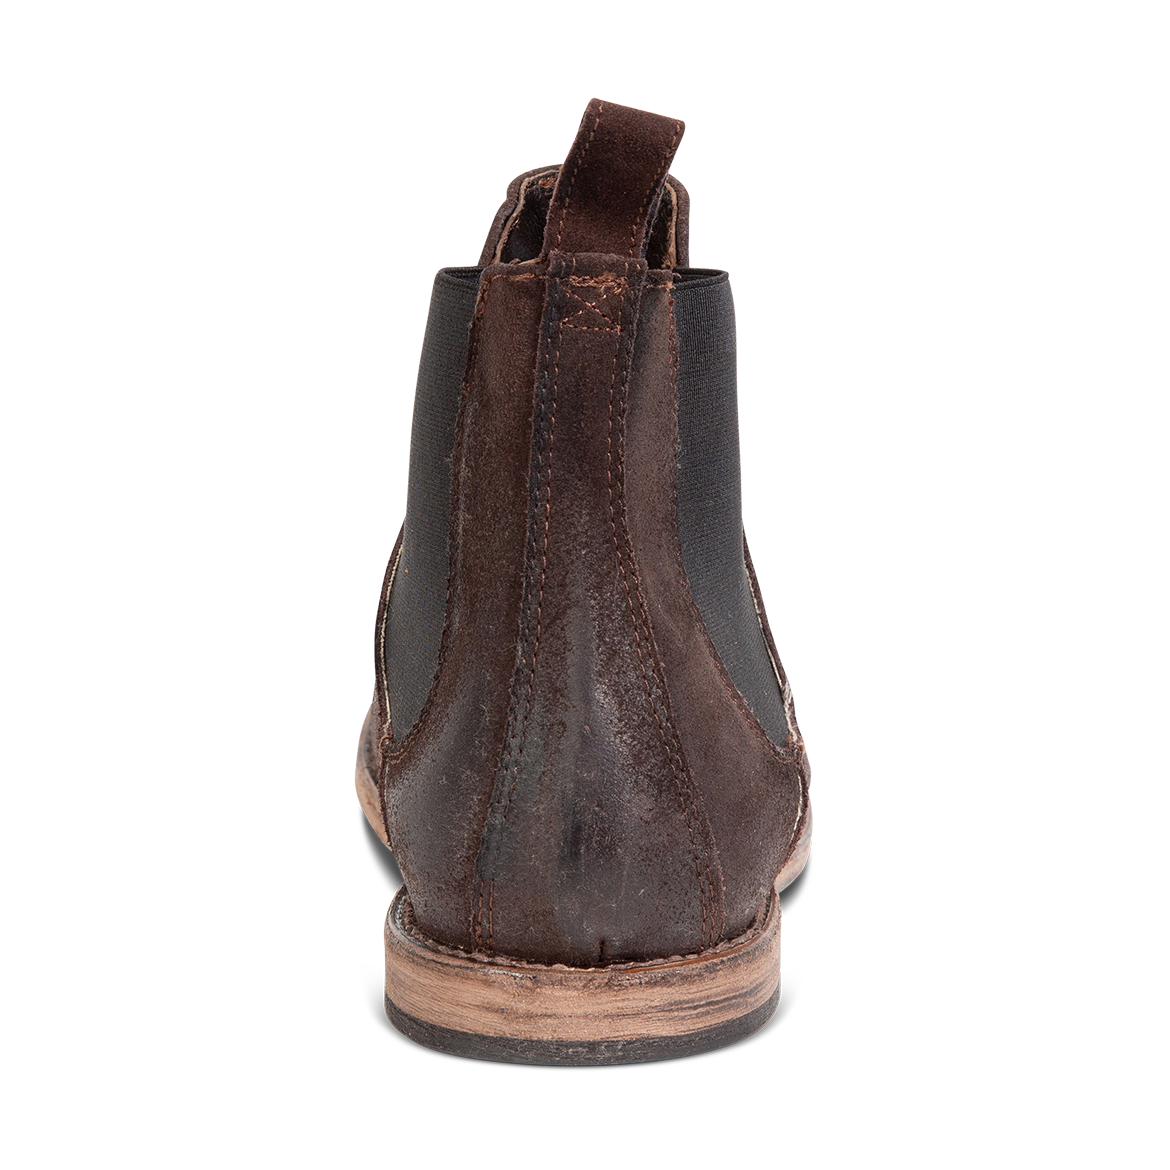 Back view showing leather pull tab on FREEBIRD men's Curtis brown suede chelsea boot